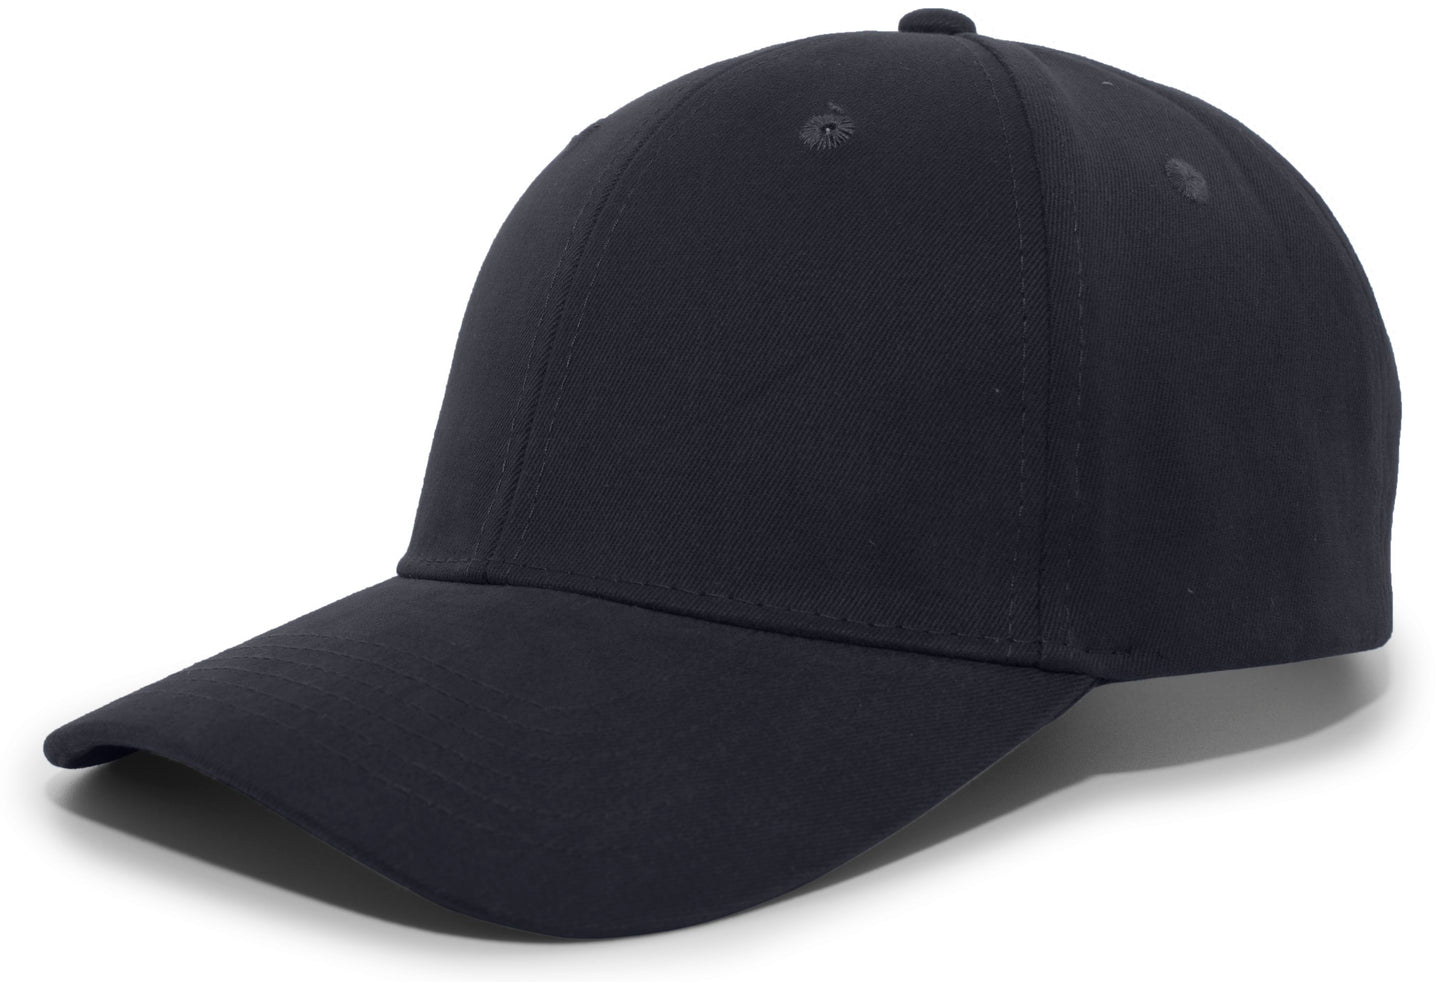 PACIFIC HEADWEAR - BRUSHED COTTON TWILL HOOK-AND-LOOP ADJUSTABLE CAP - 101C